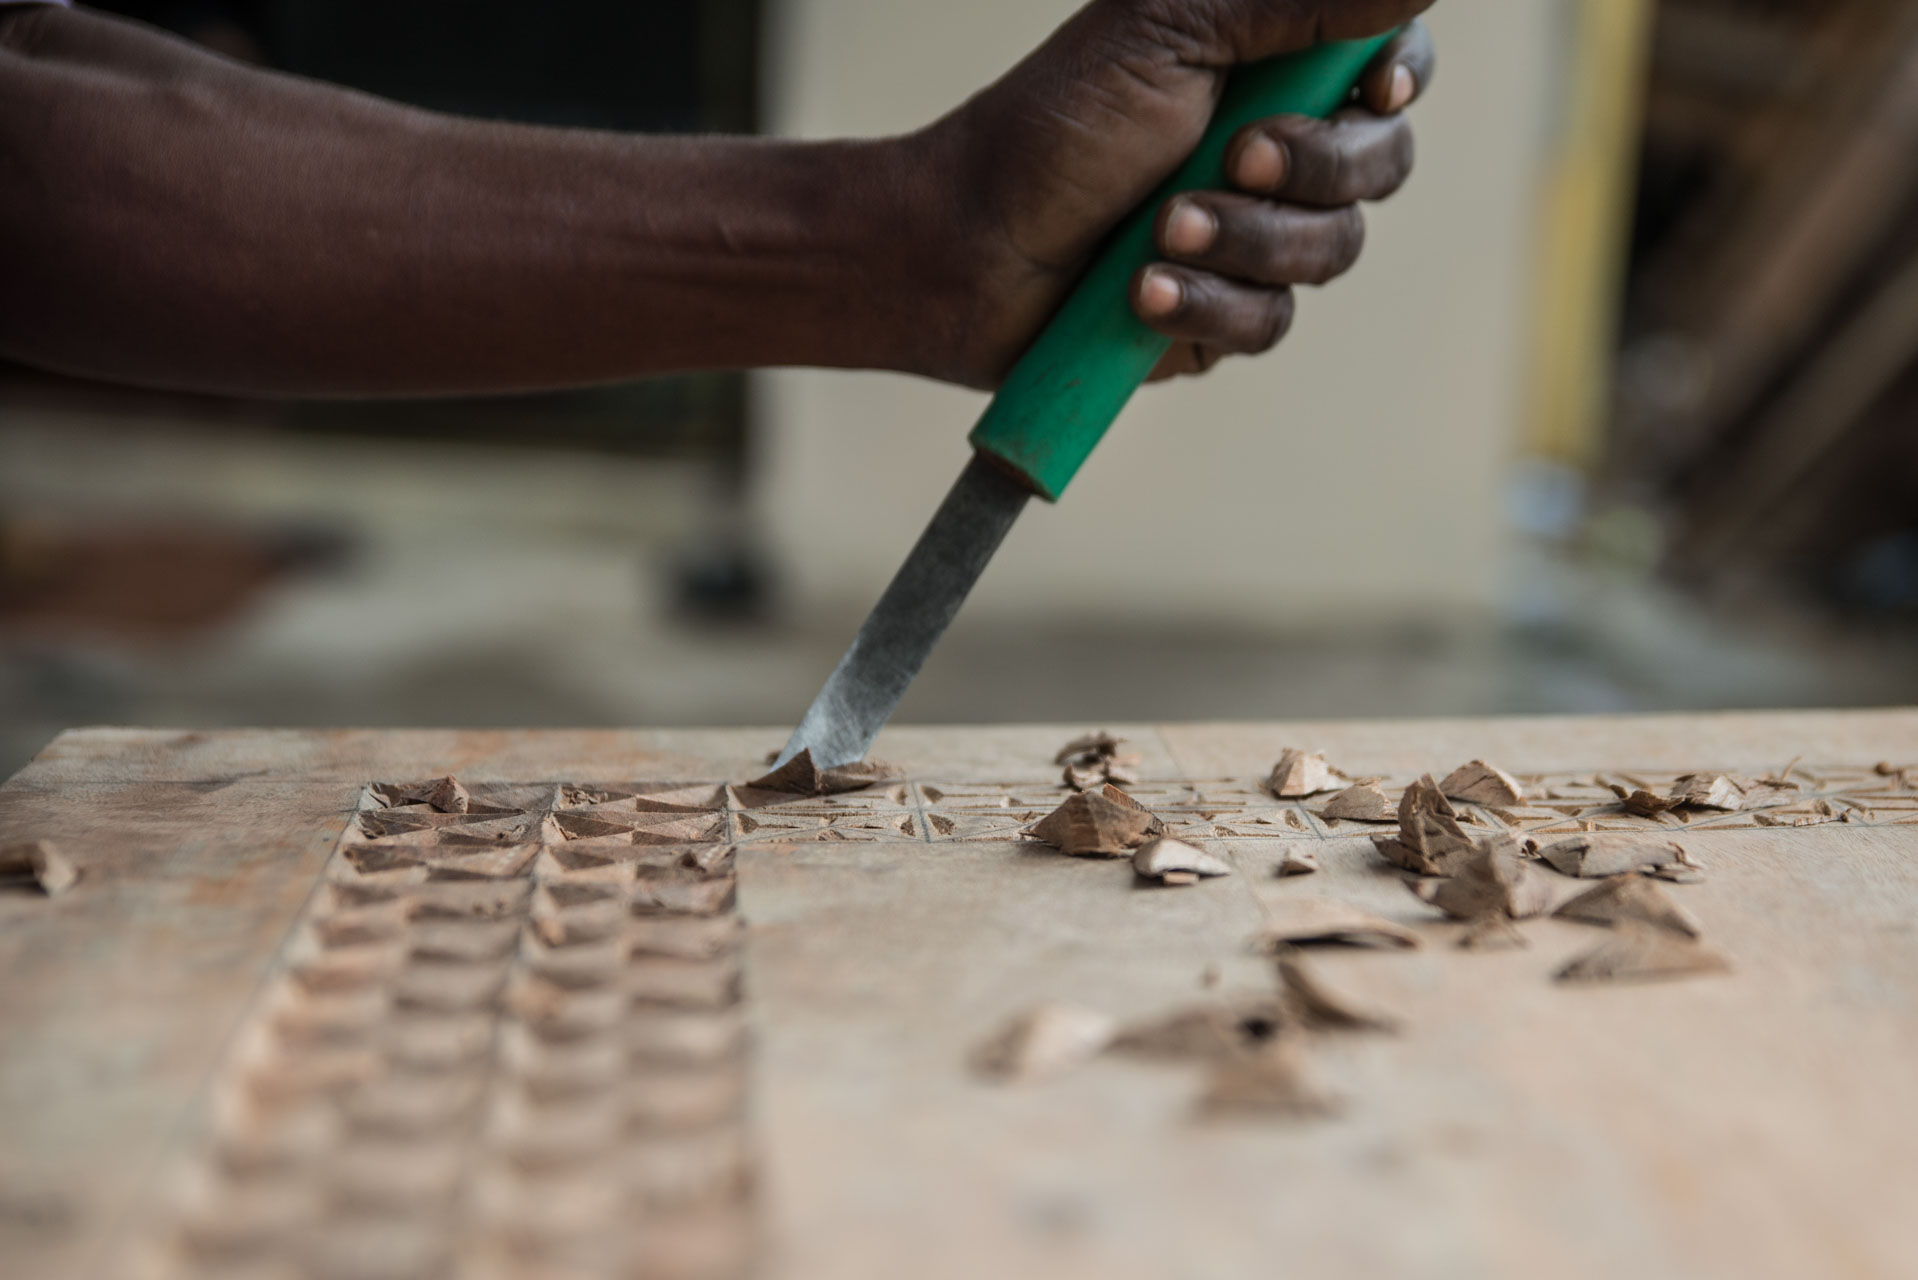 Above: A wood carver chisels out a traditional Swahili motif